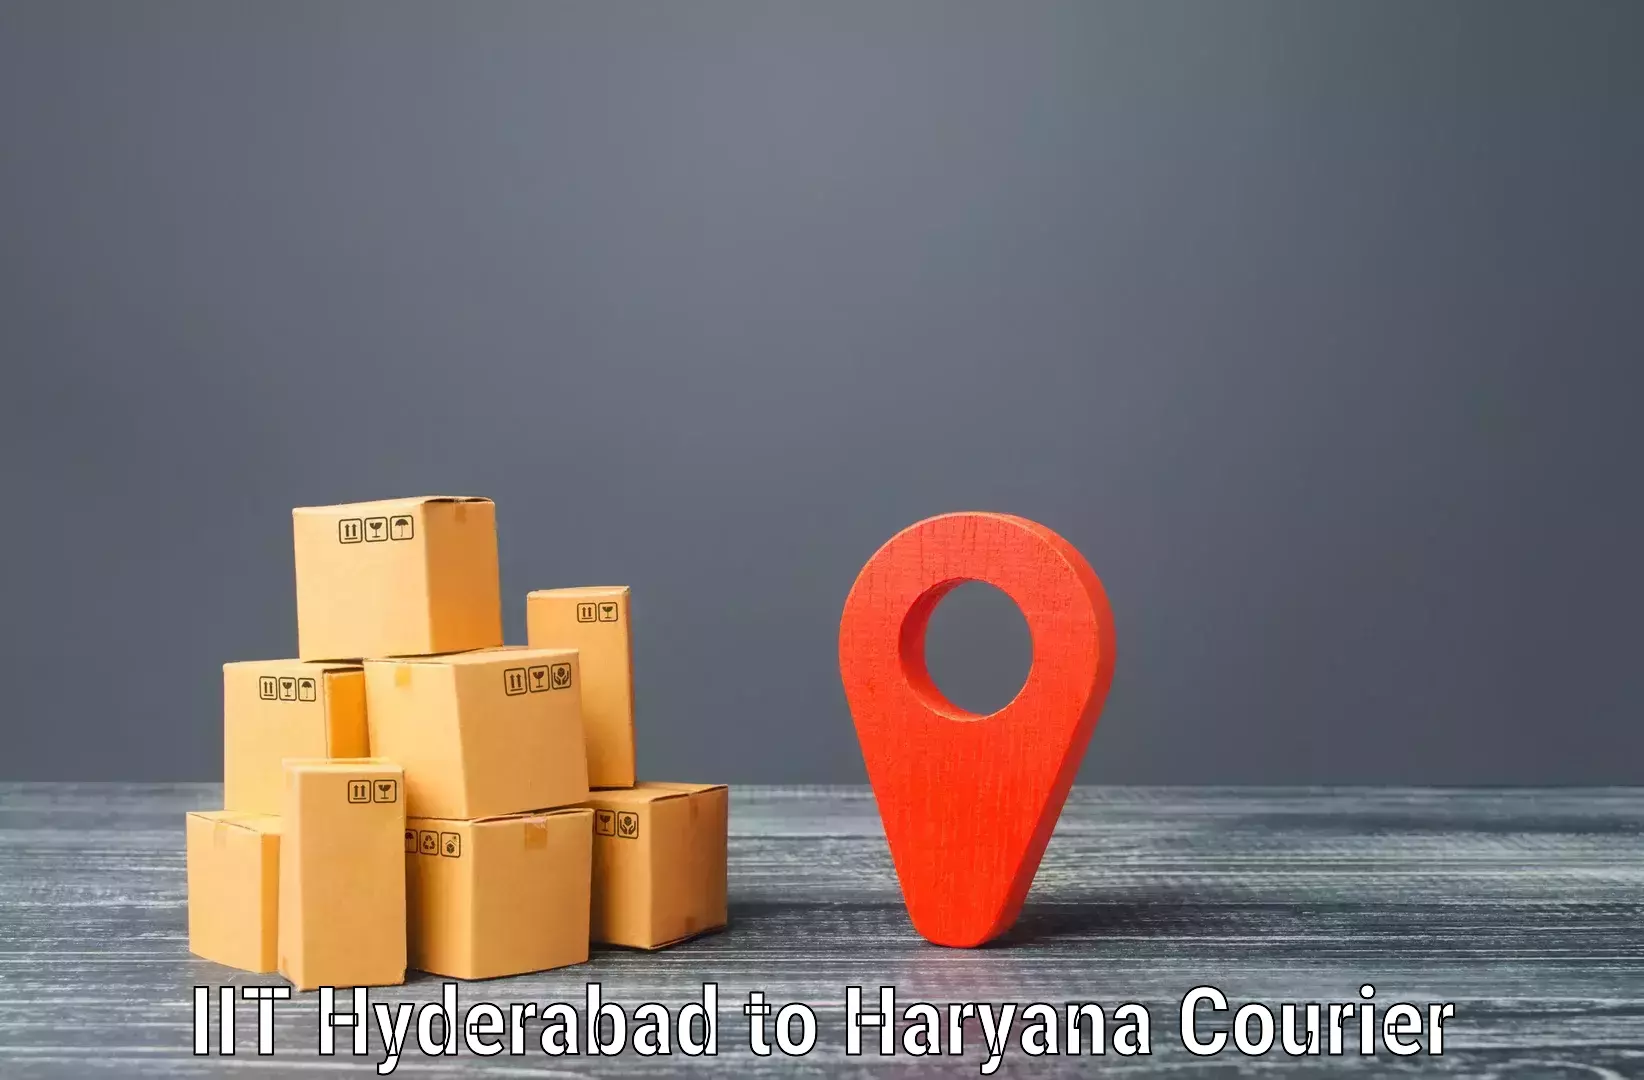 Cargo delivery service IIT Hyderabad to Assandh